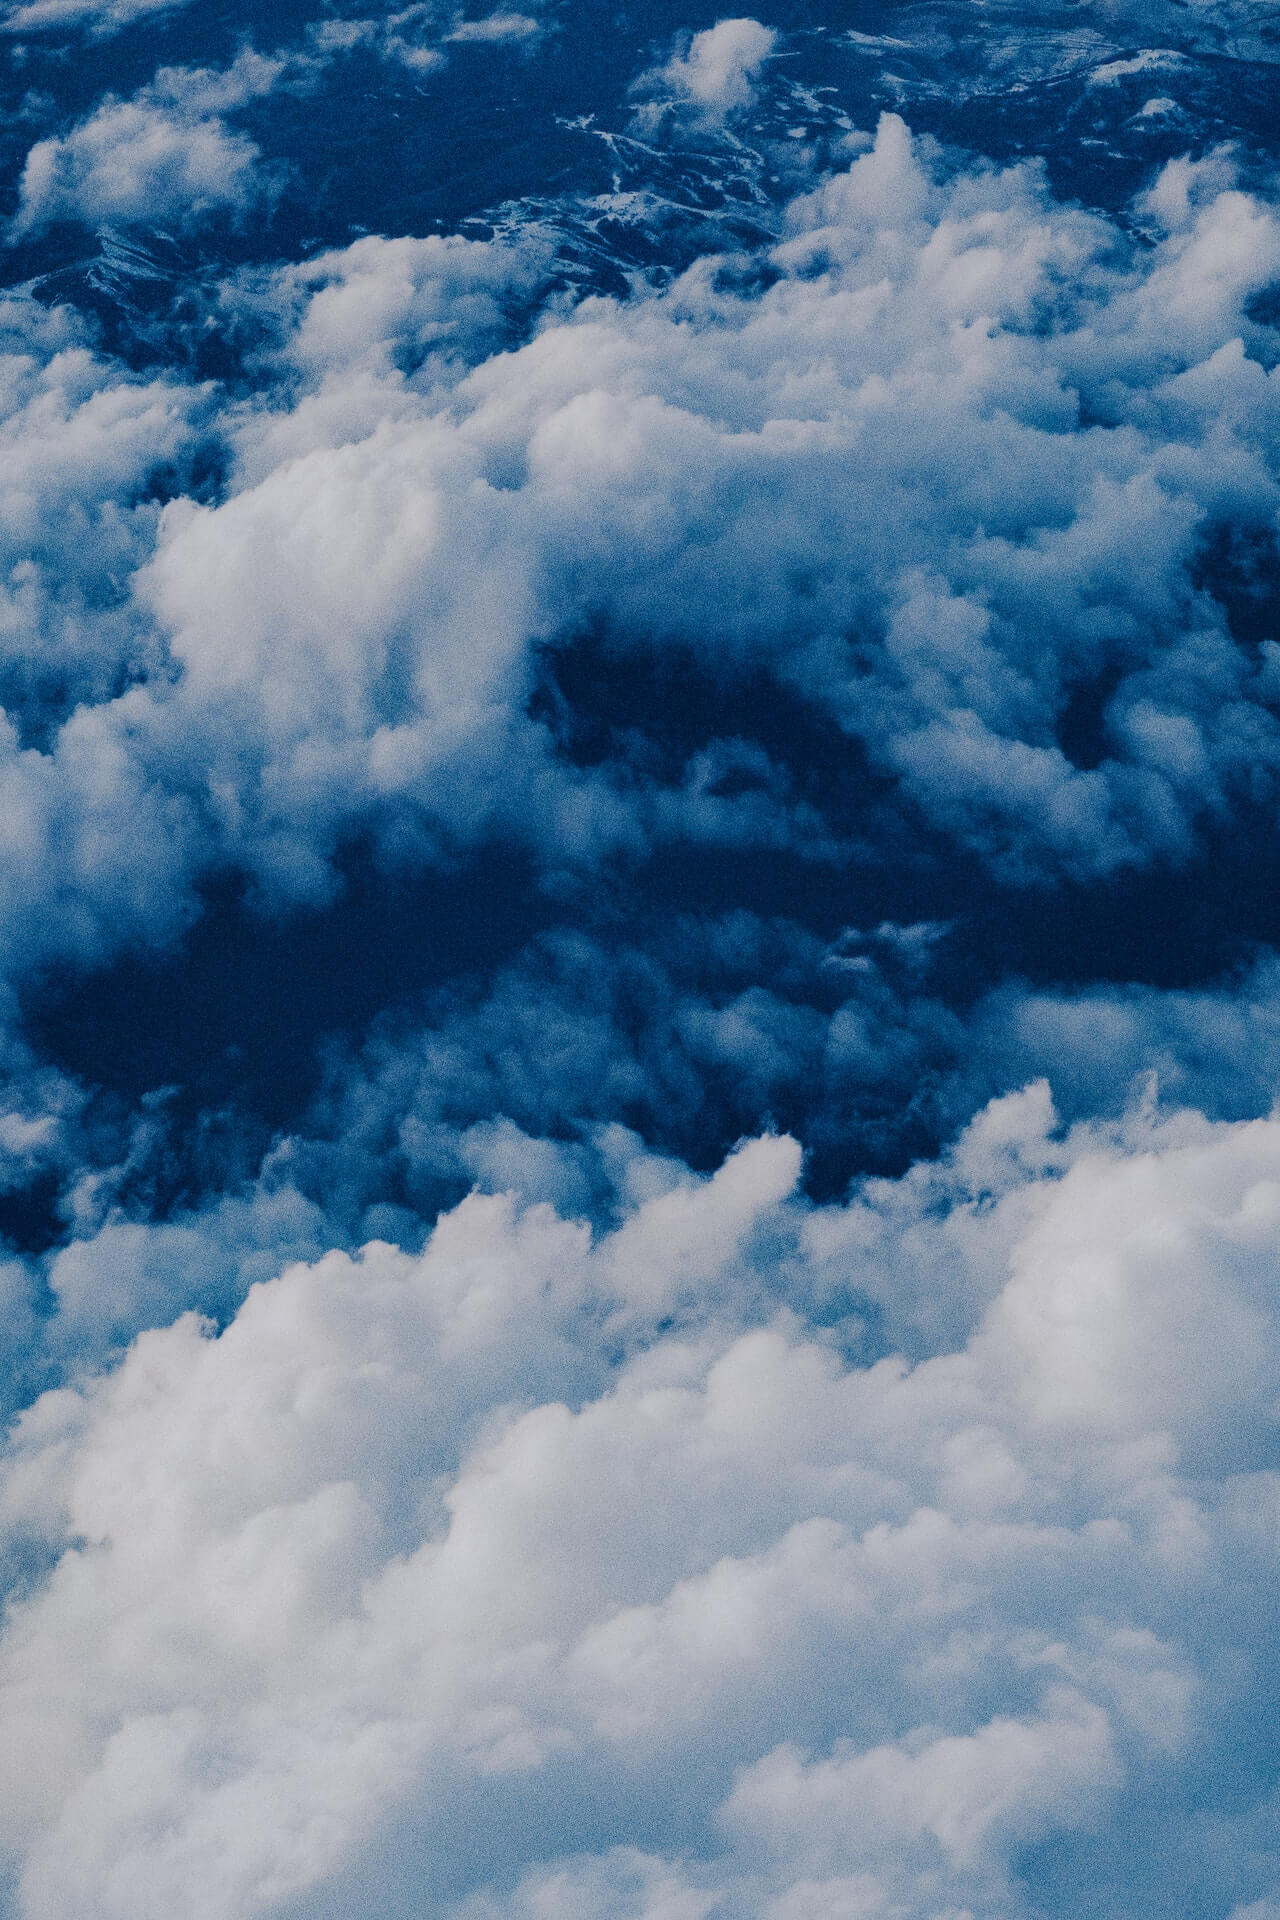 The prettiest sky wallpaper and cloud wallpaper for iphone